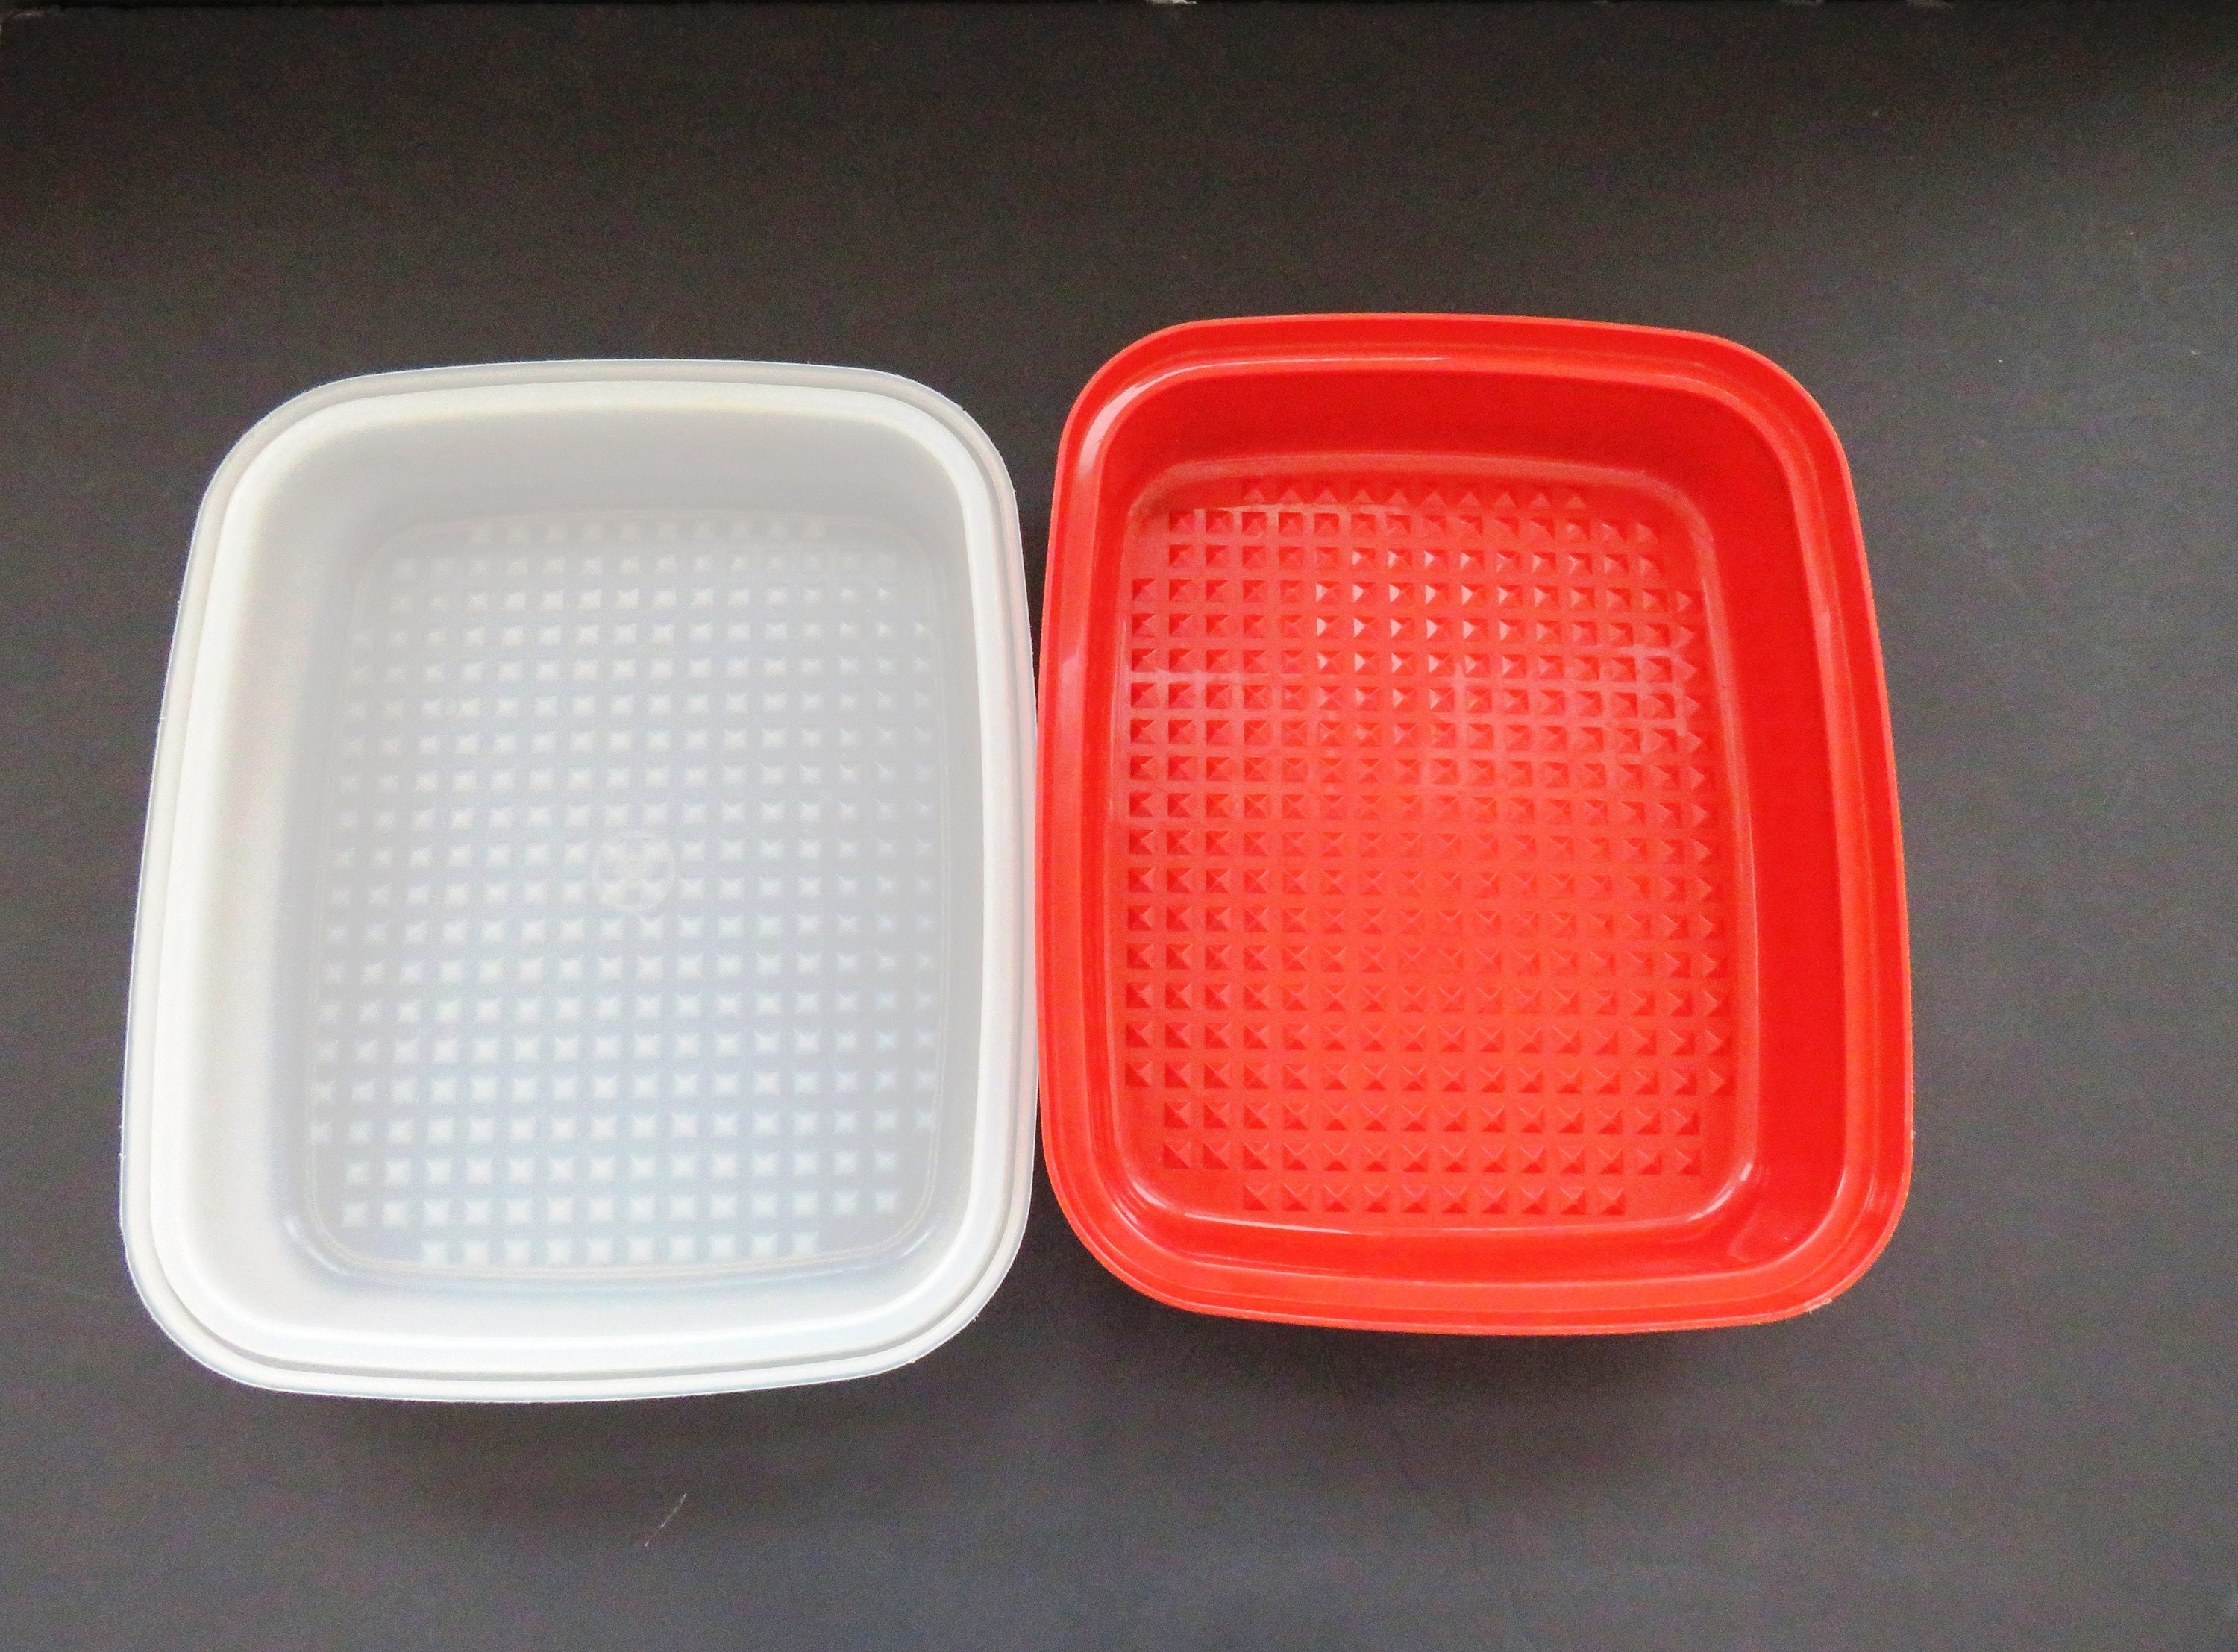 Vintage Tupperware Large Meat Marinade Container 2 Piece Paprika #1294-5  w/Lid